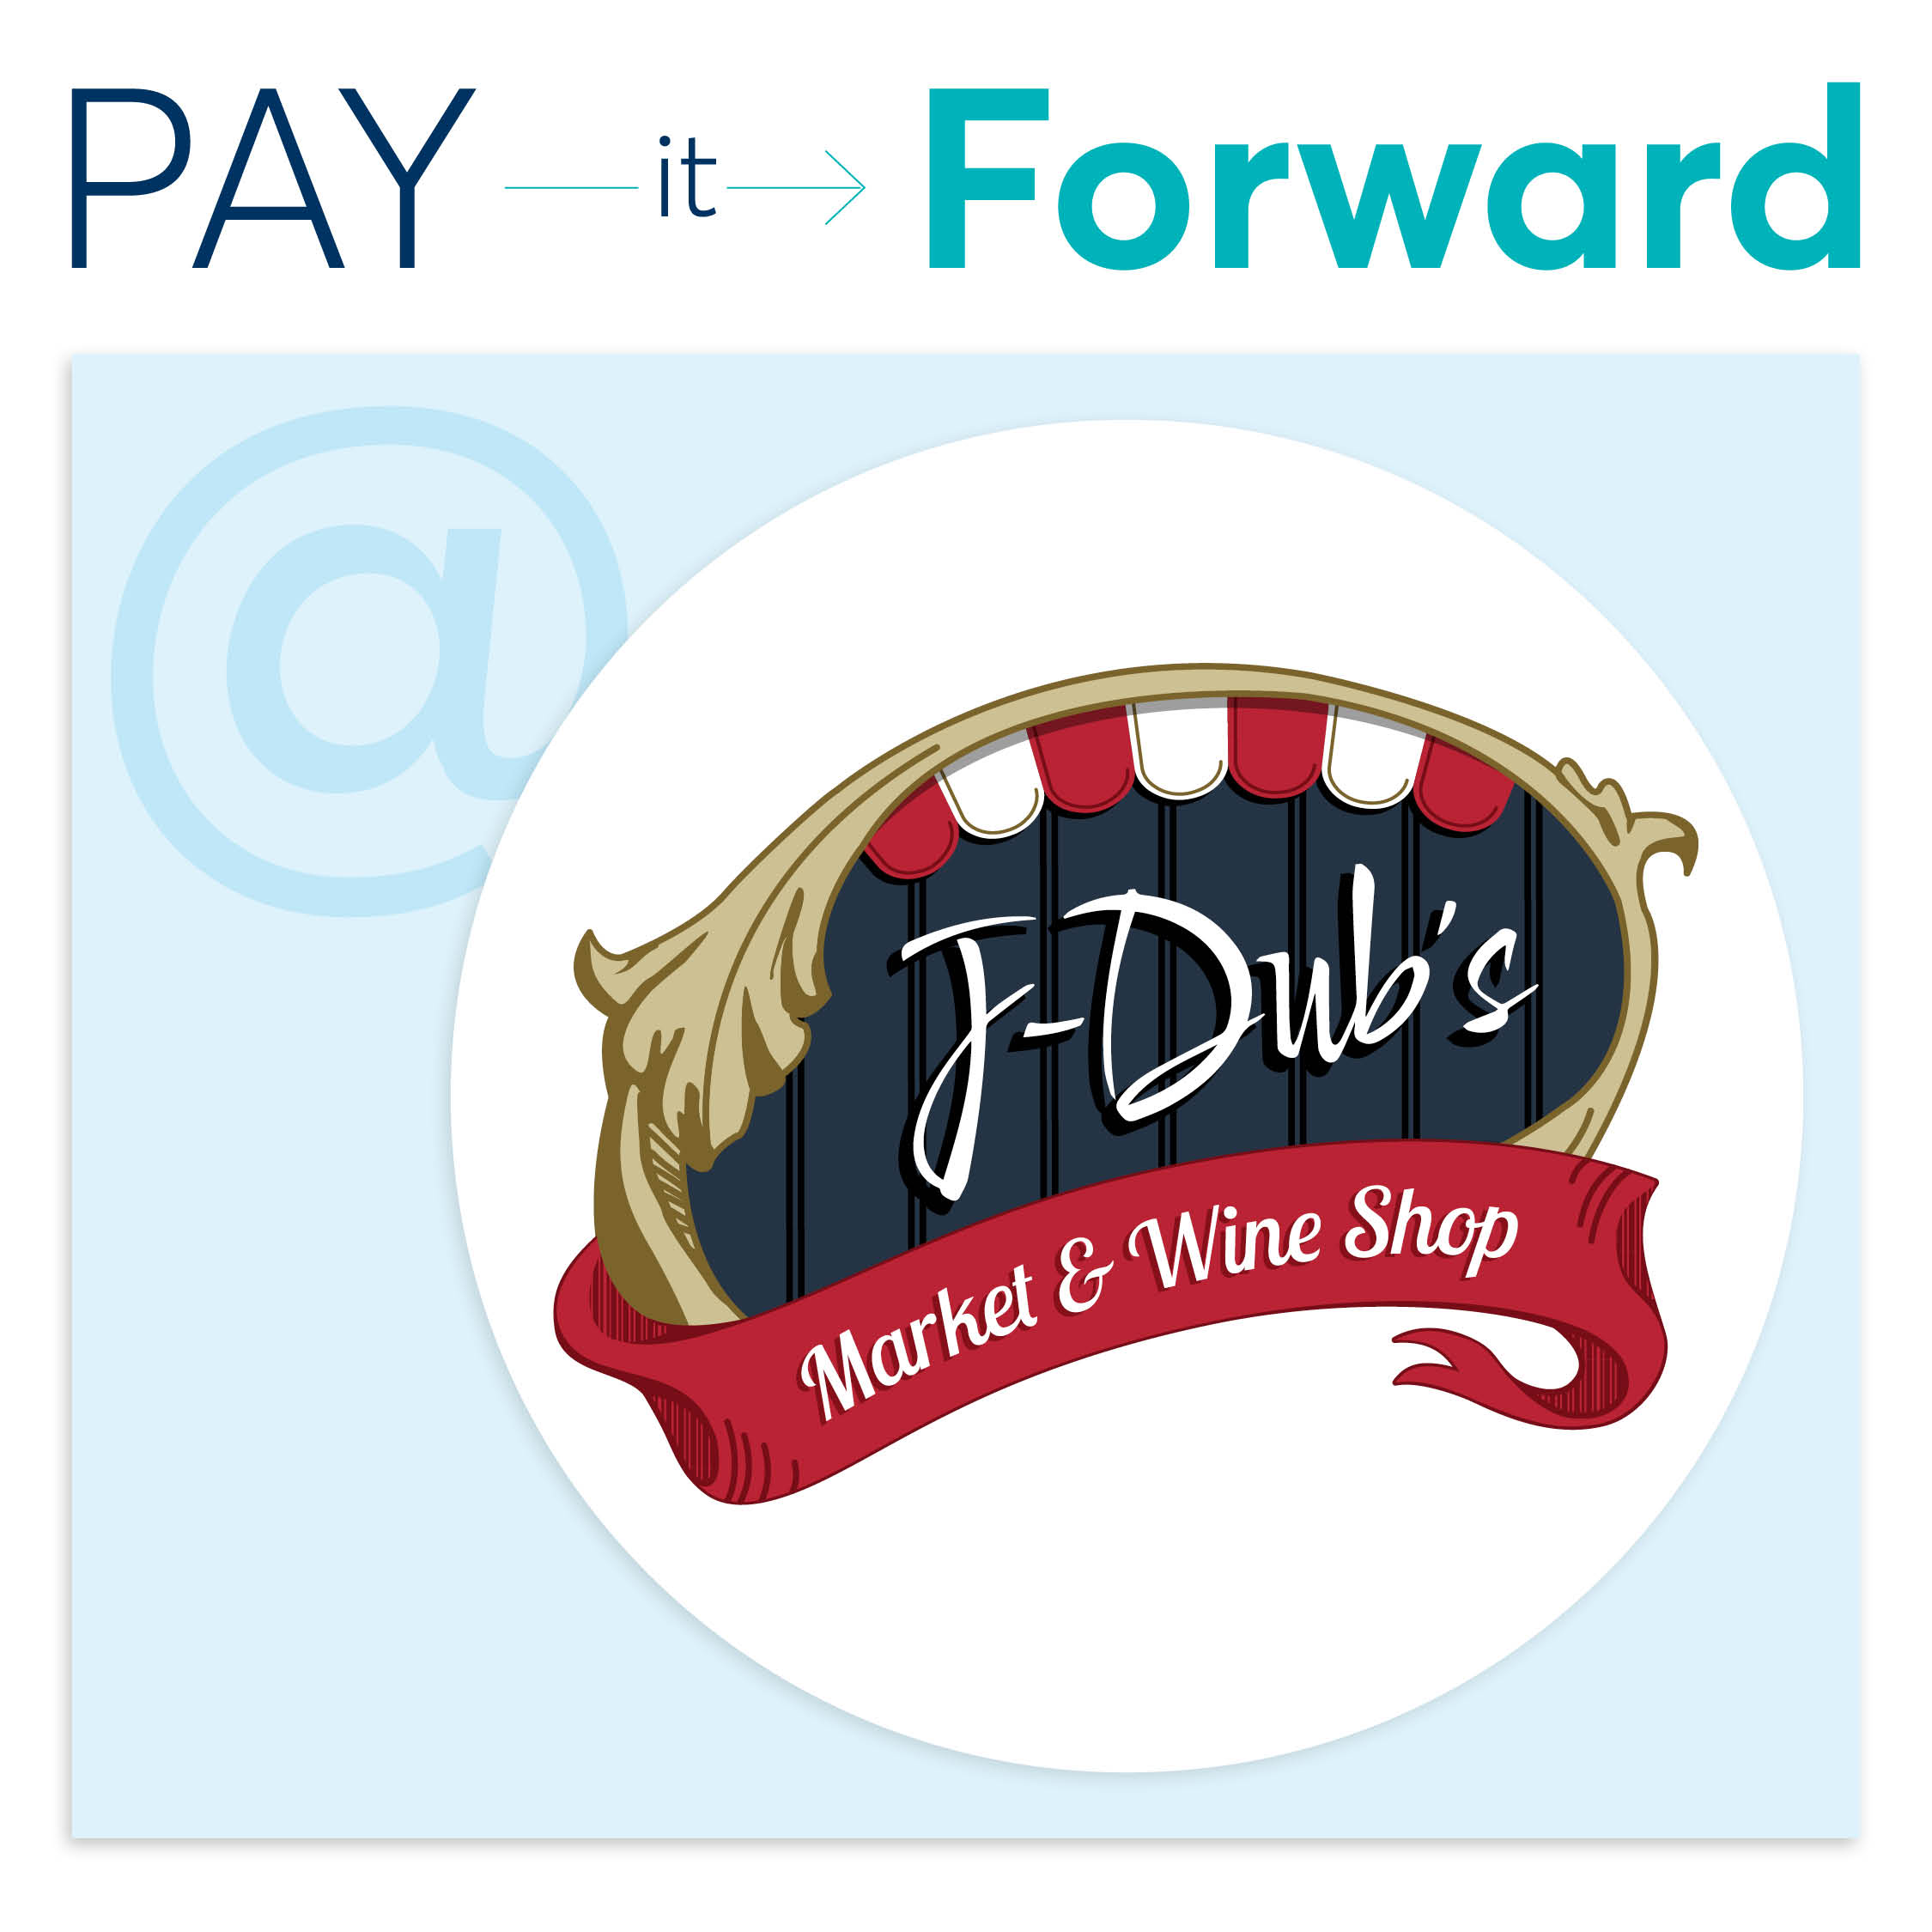 Pay it forward to J-Dubs